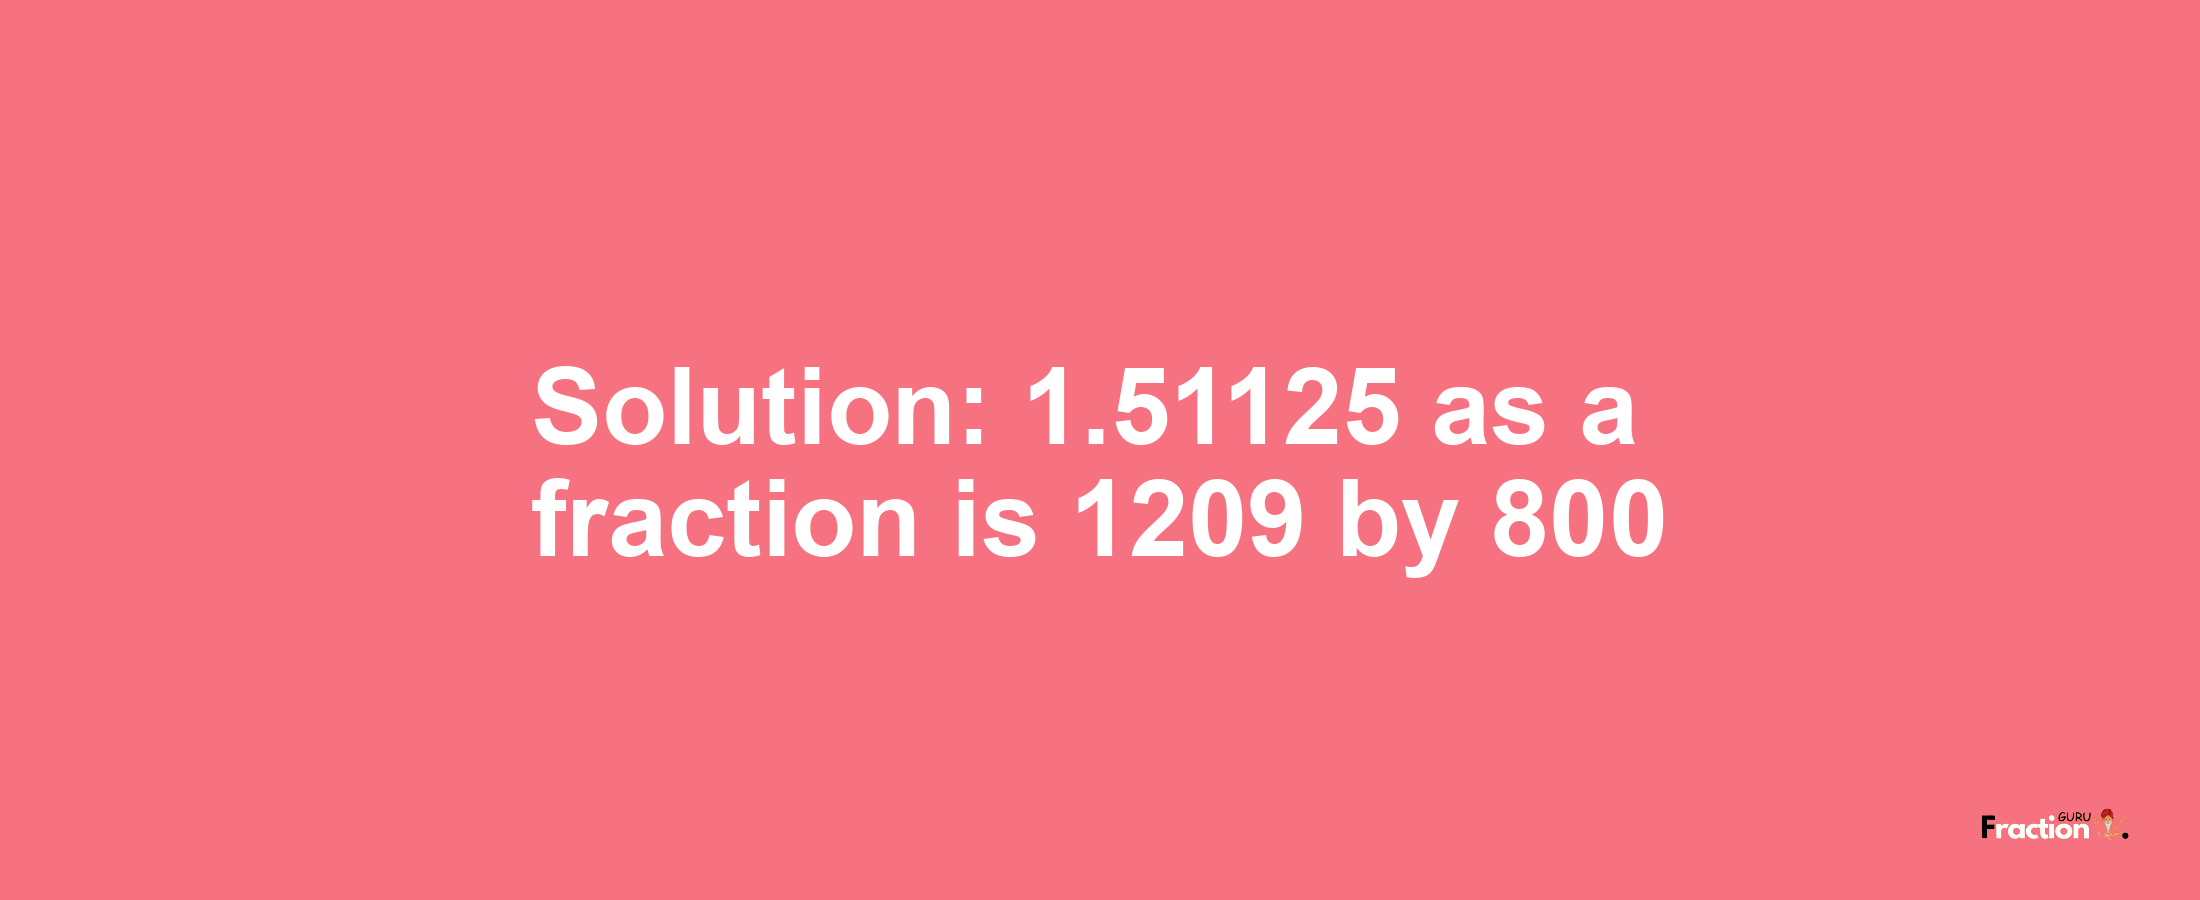 Solution:1.51125 as a fraction is 1209/800